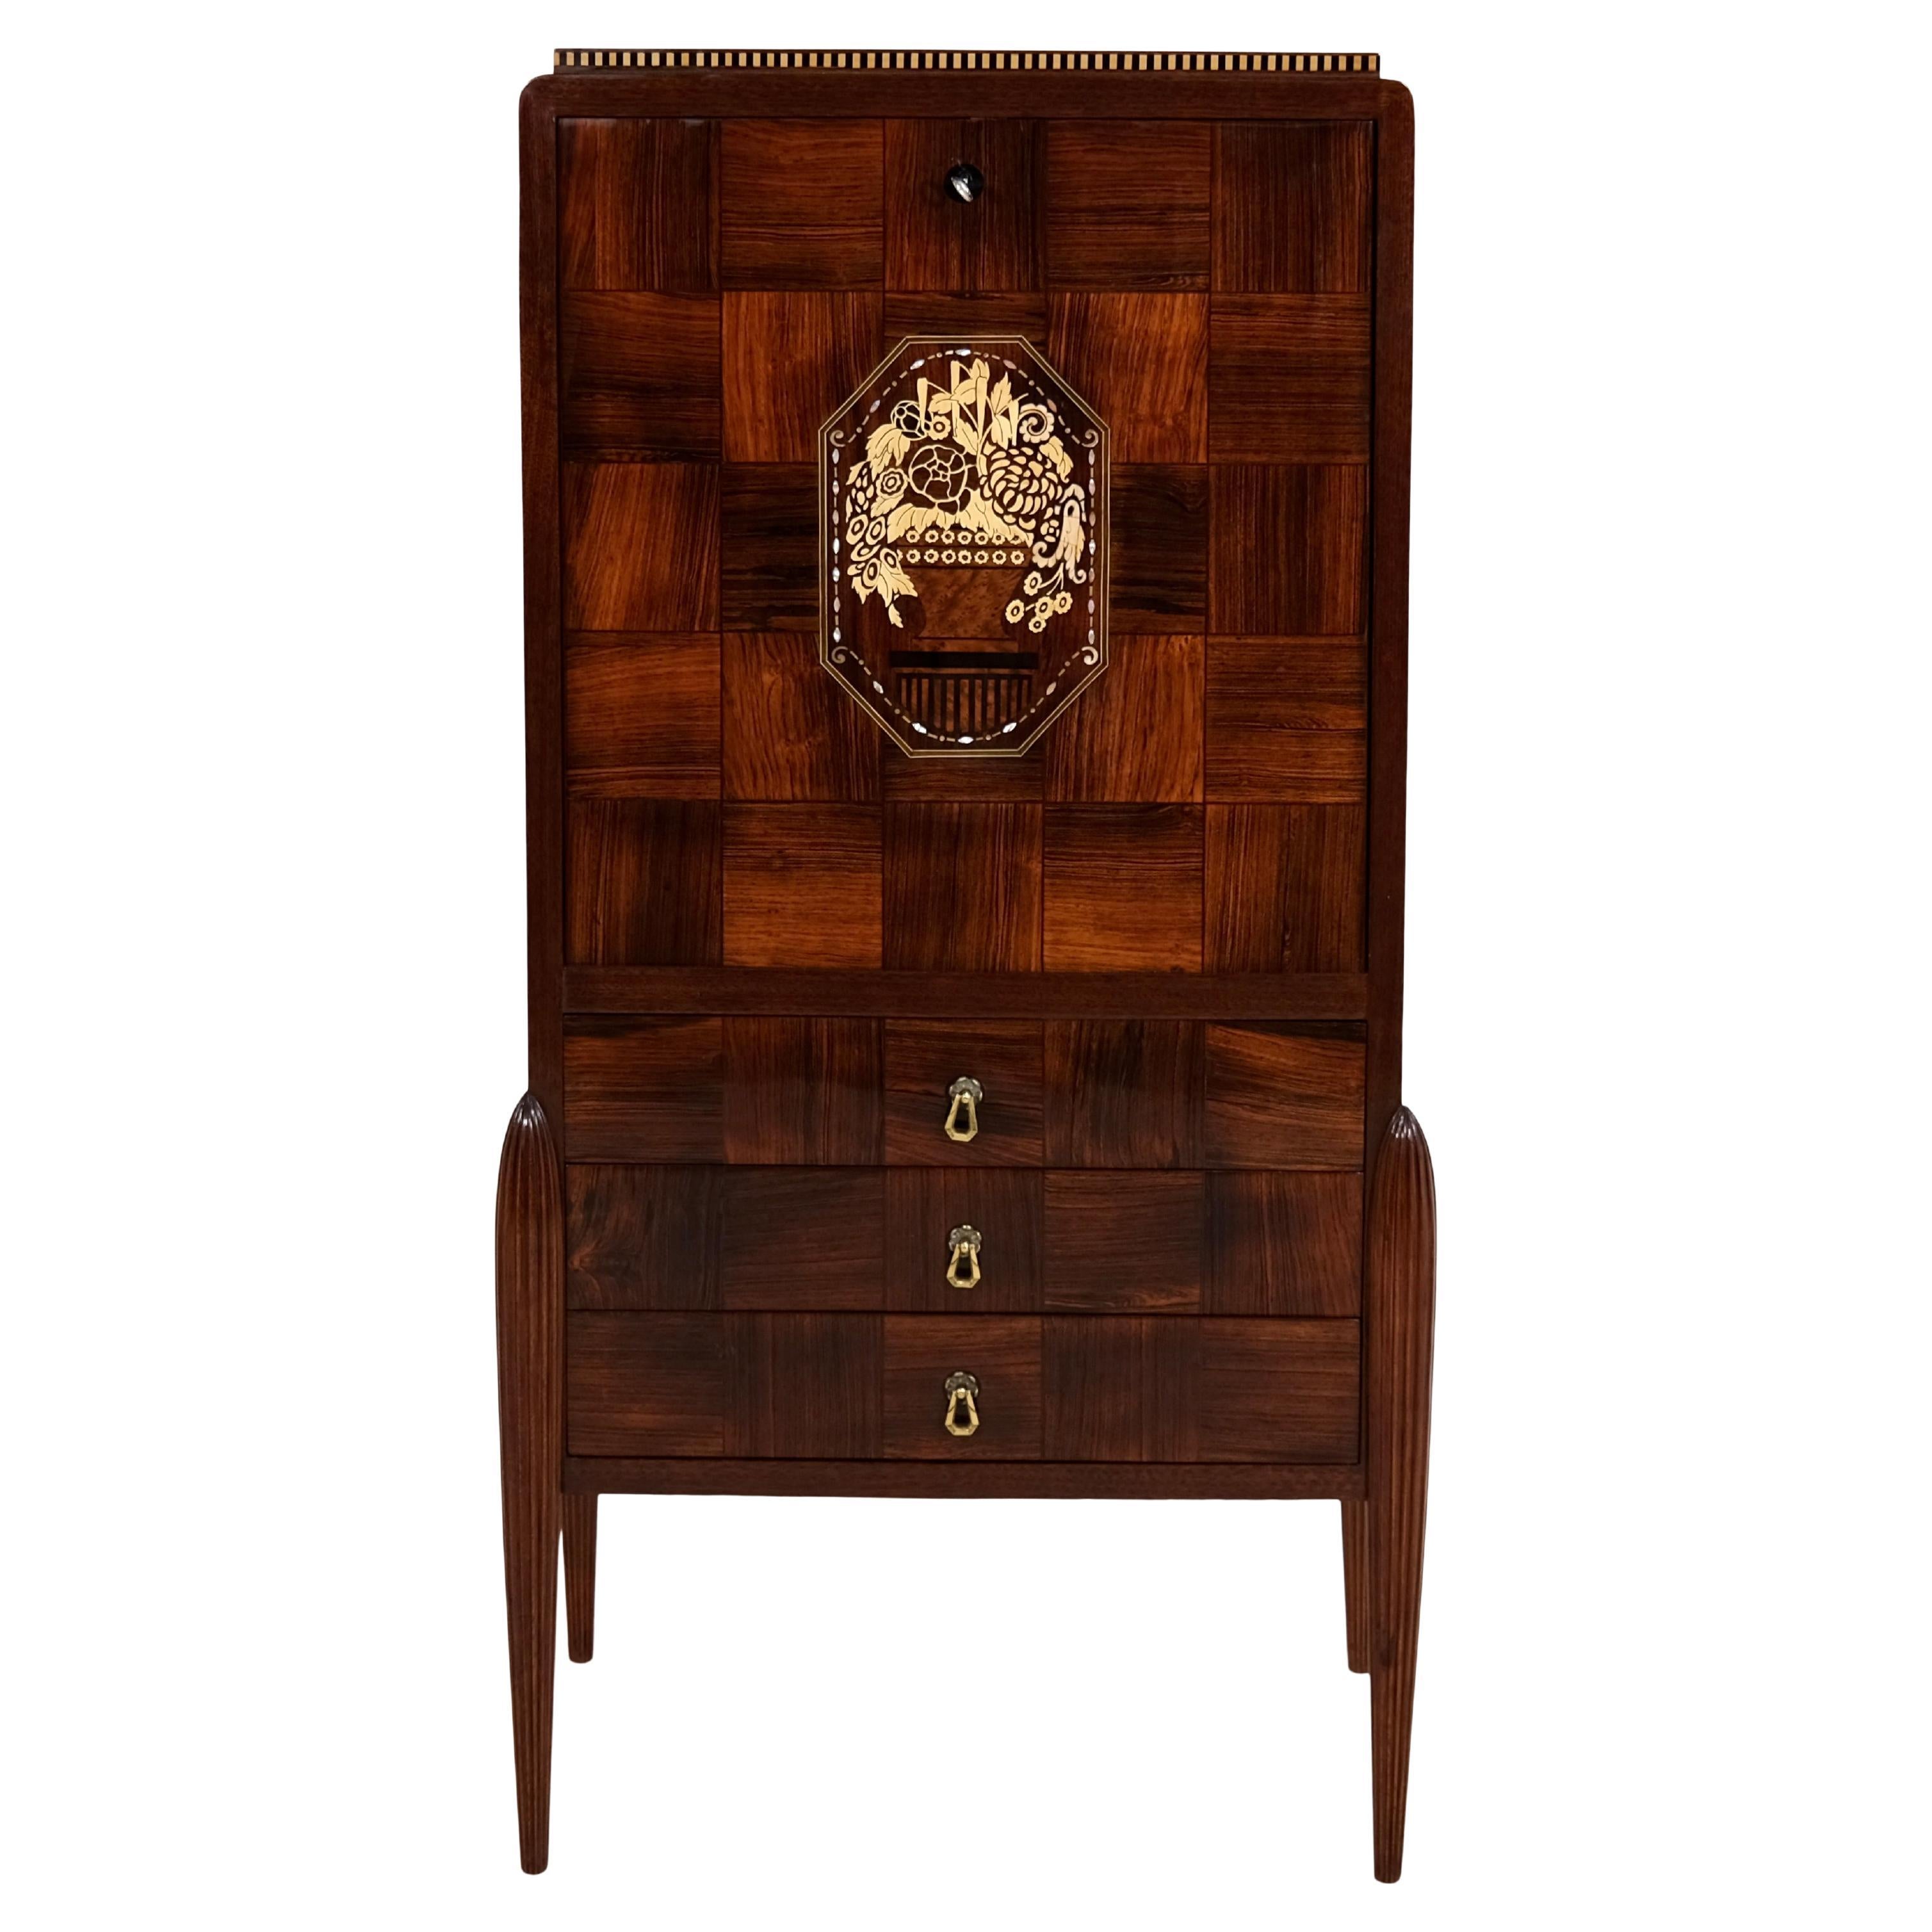 Early French Art Deco Secretaire Desk with Marquetry and Inlays For Sale